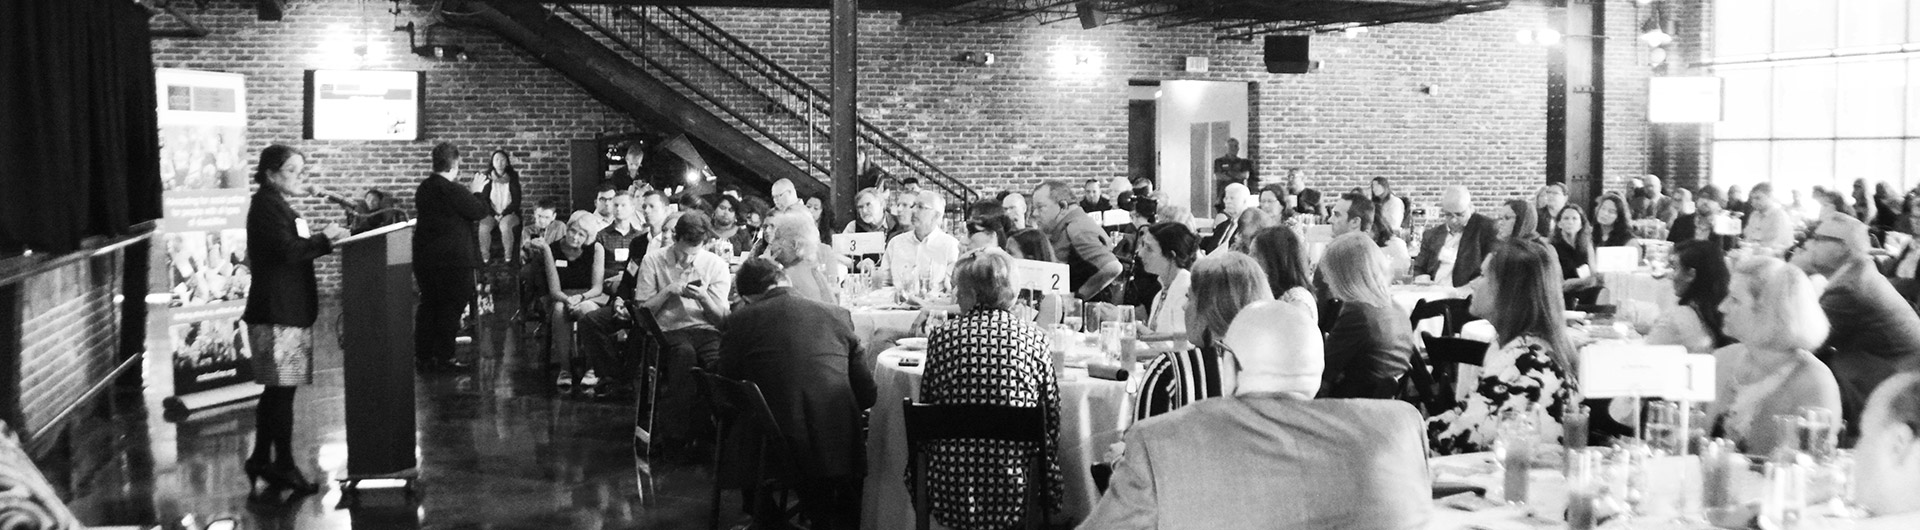 Black and white image of people seated at a CCDC event listening to a speaker